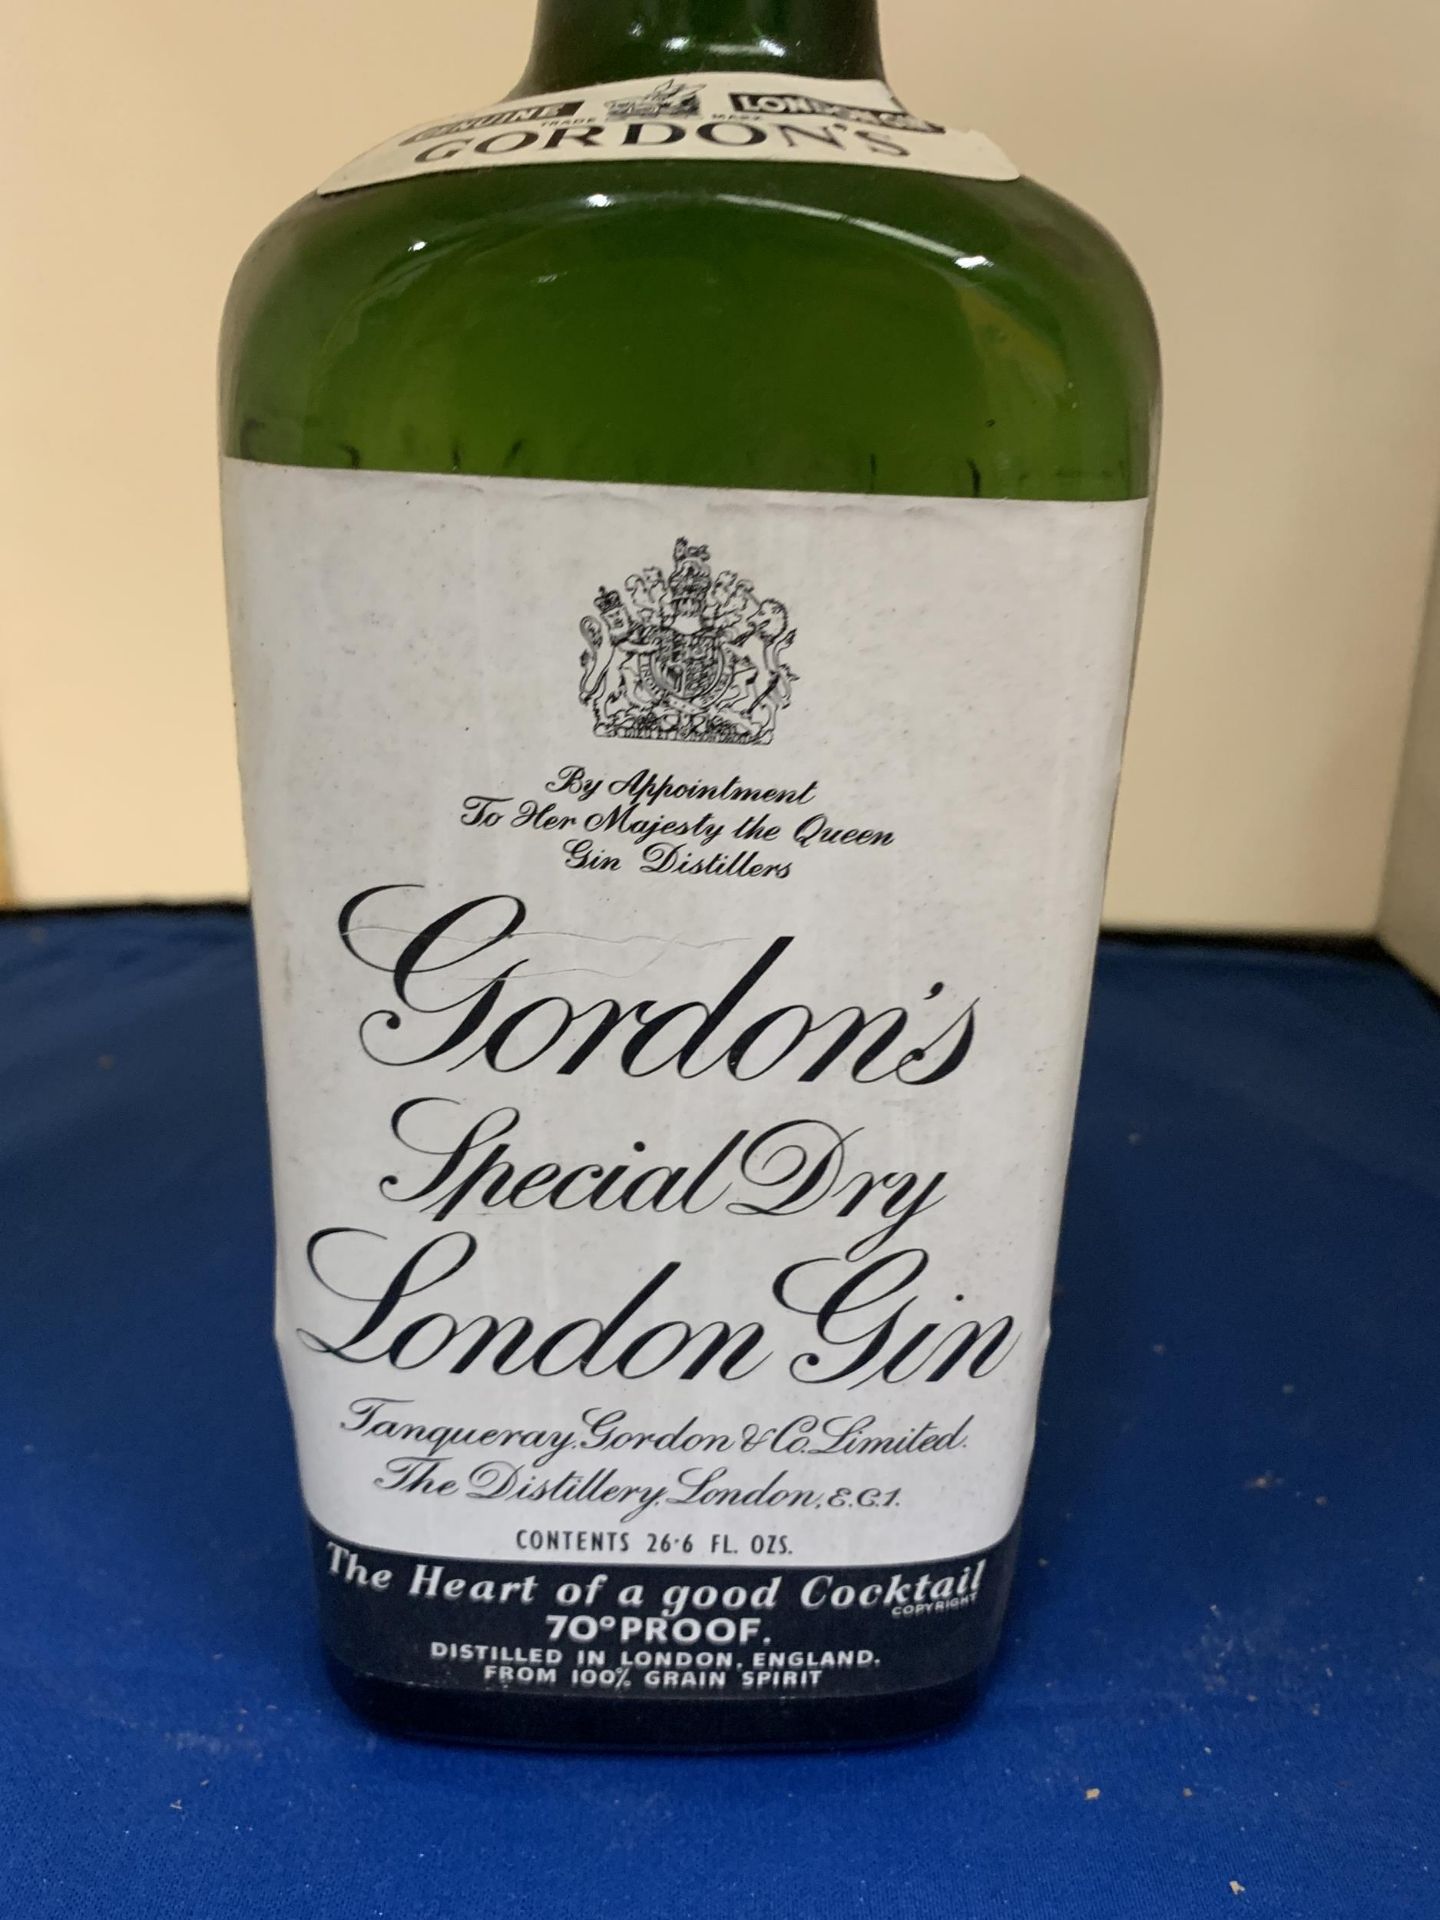 A BOTTLE OF GORDONS SPECIAL DRY LONDON GIN 70% PROOF - Image 2 of 5